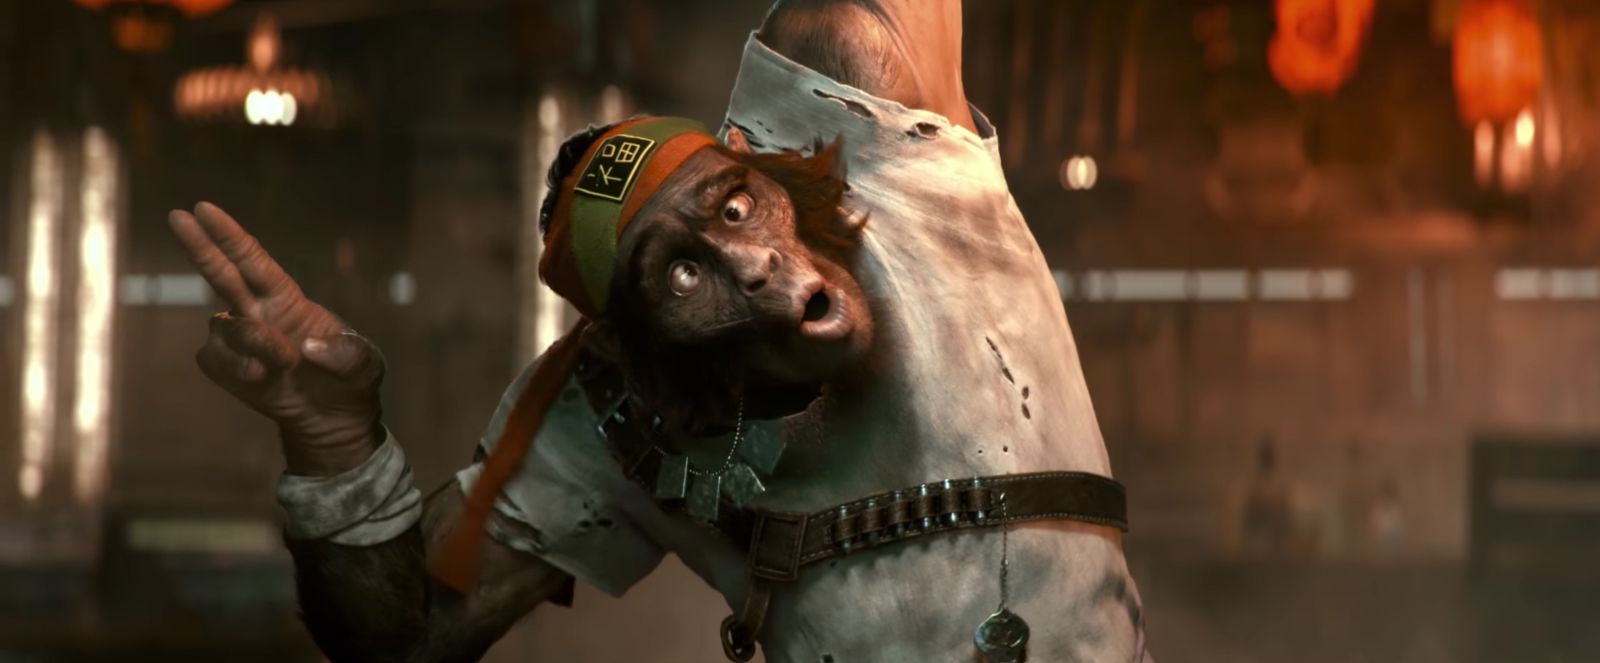 Image for Beyond Good and Evil 2 trailer breakdown with Michel Ancel hints at story plot point